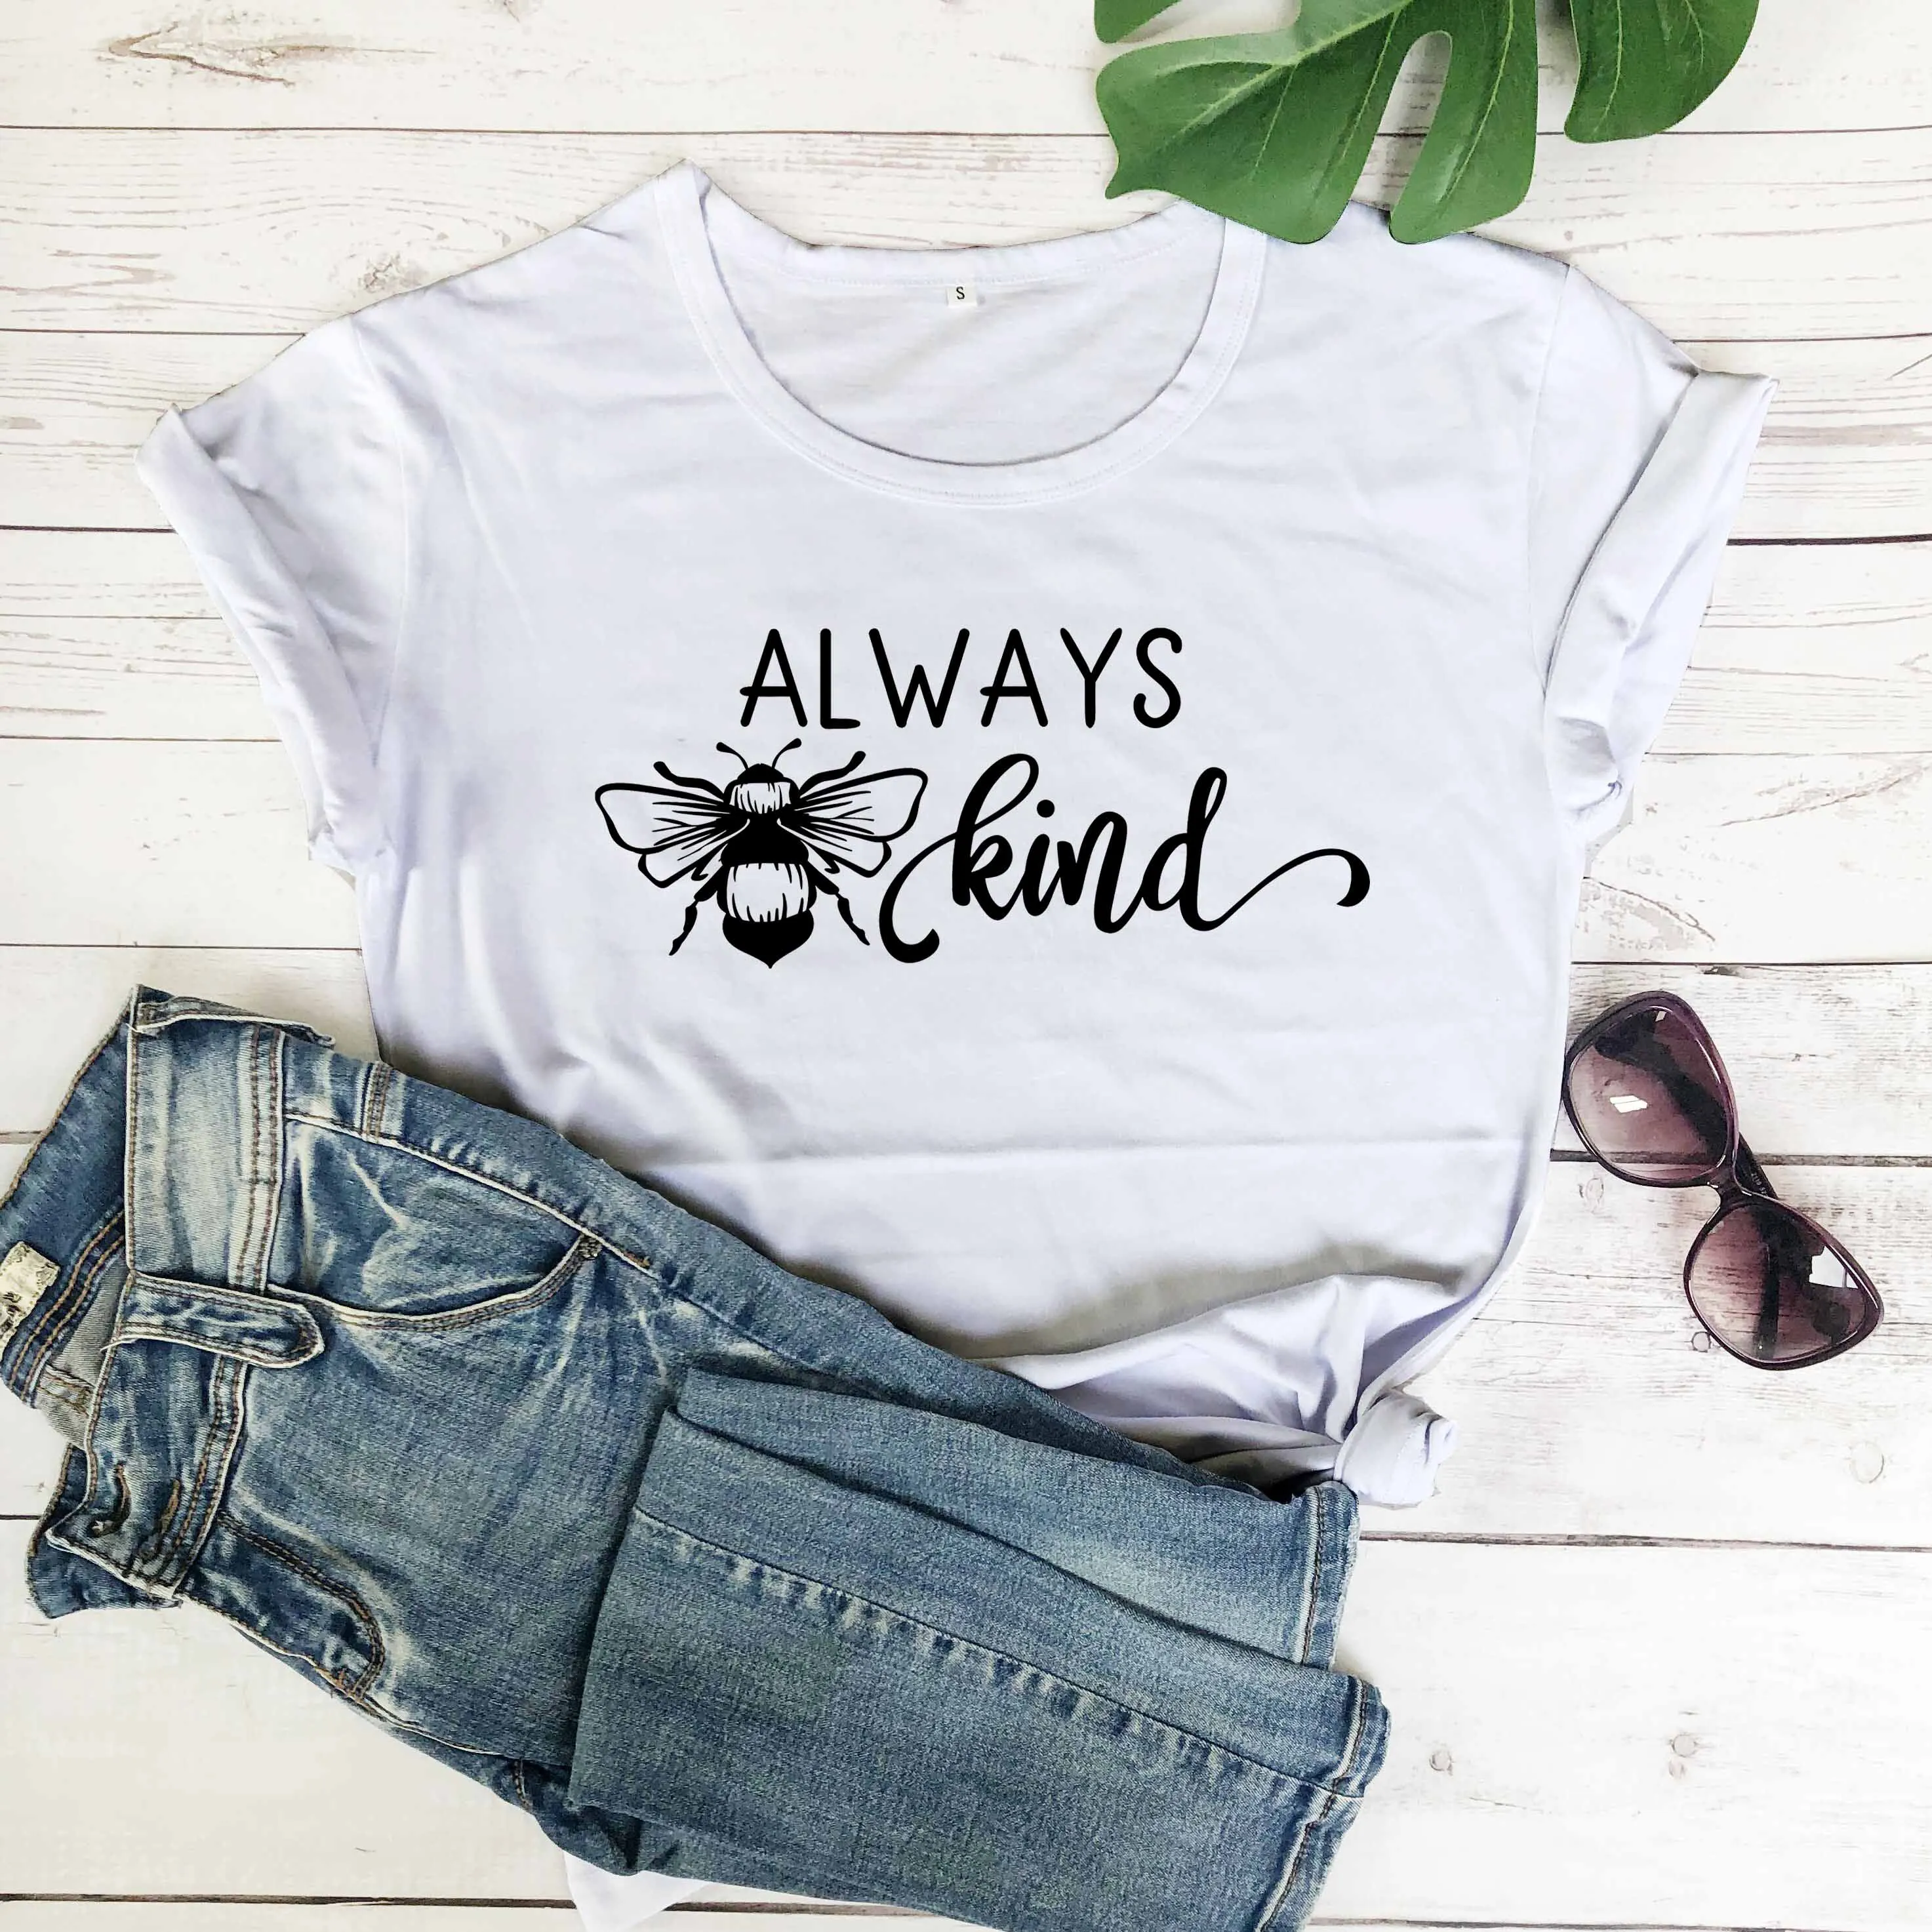 

Always Be Kind graphic cotton casual camisetas aesthetic young hipster grunge tumblr slogan quote t shirt girl gift tee top M414